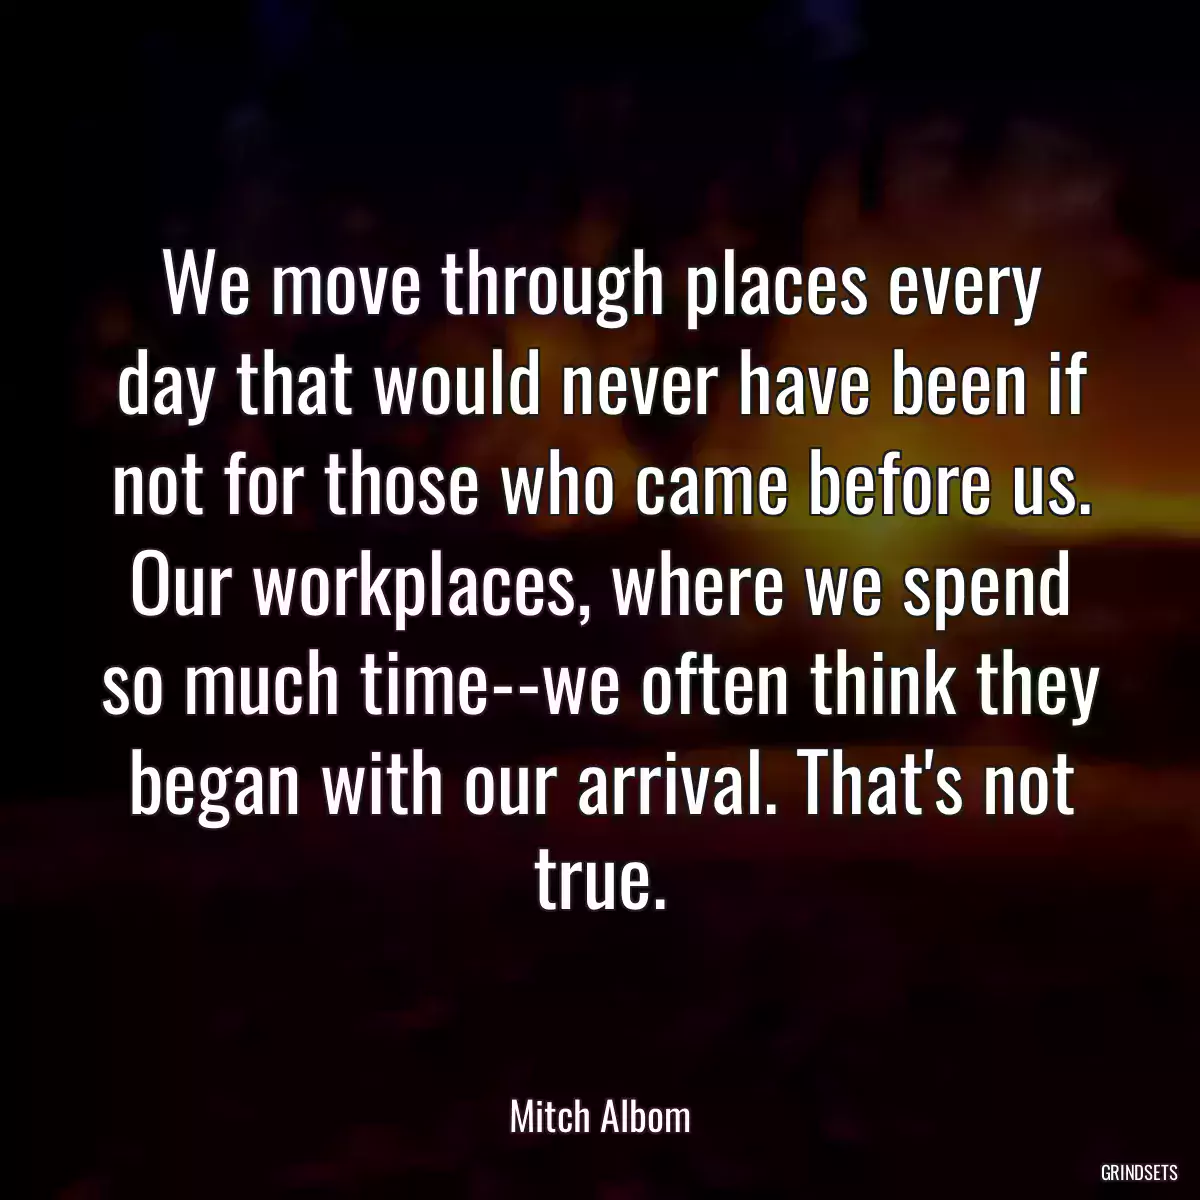 We move through places every day that would never have been if not for those who came before us. Our workplaces, where we spend so much time--we often think they began with our arrival. That\'s not true.